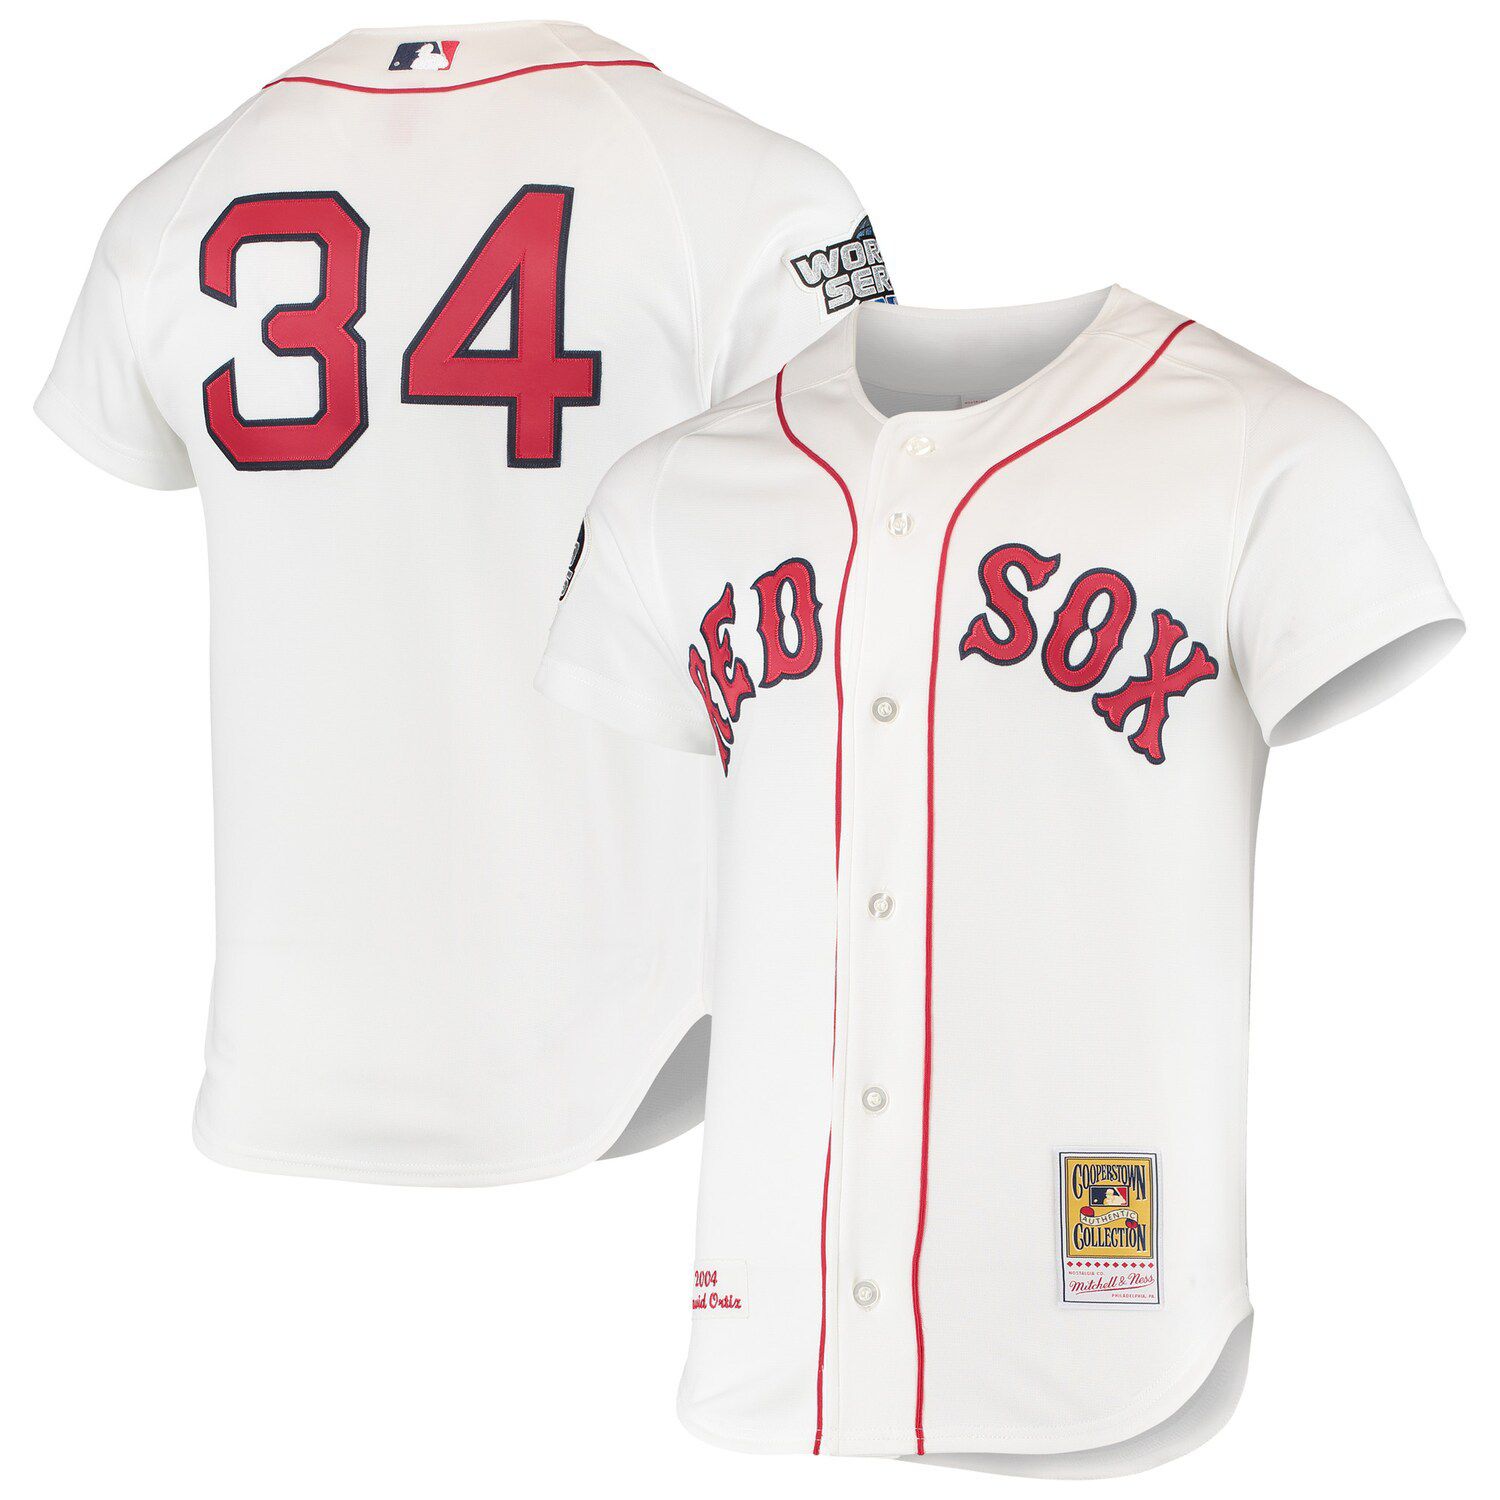 Cooperstown Collection White Sox Jersey